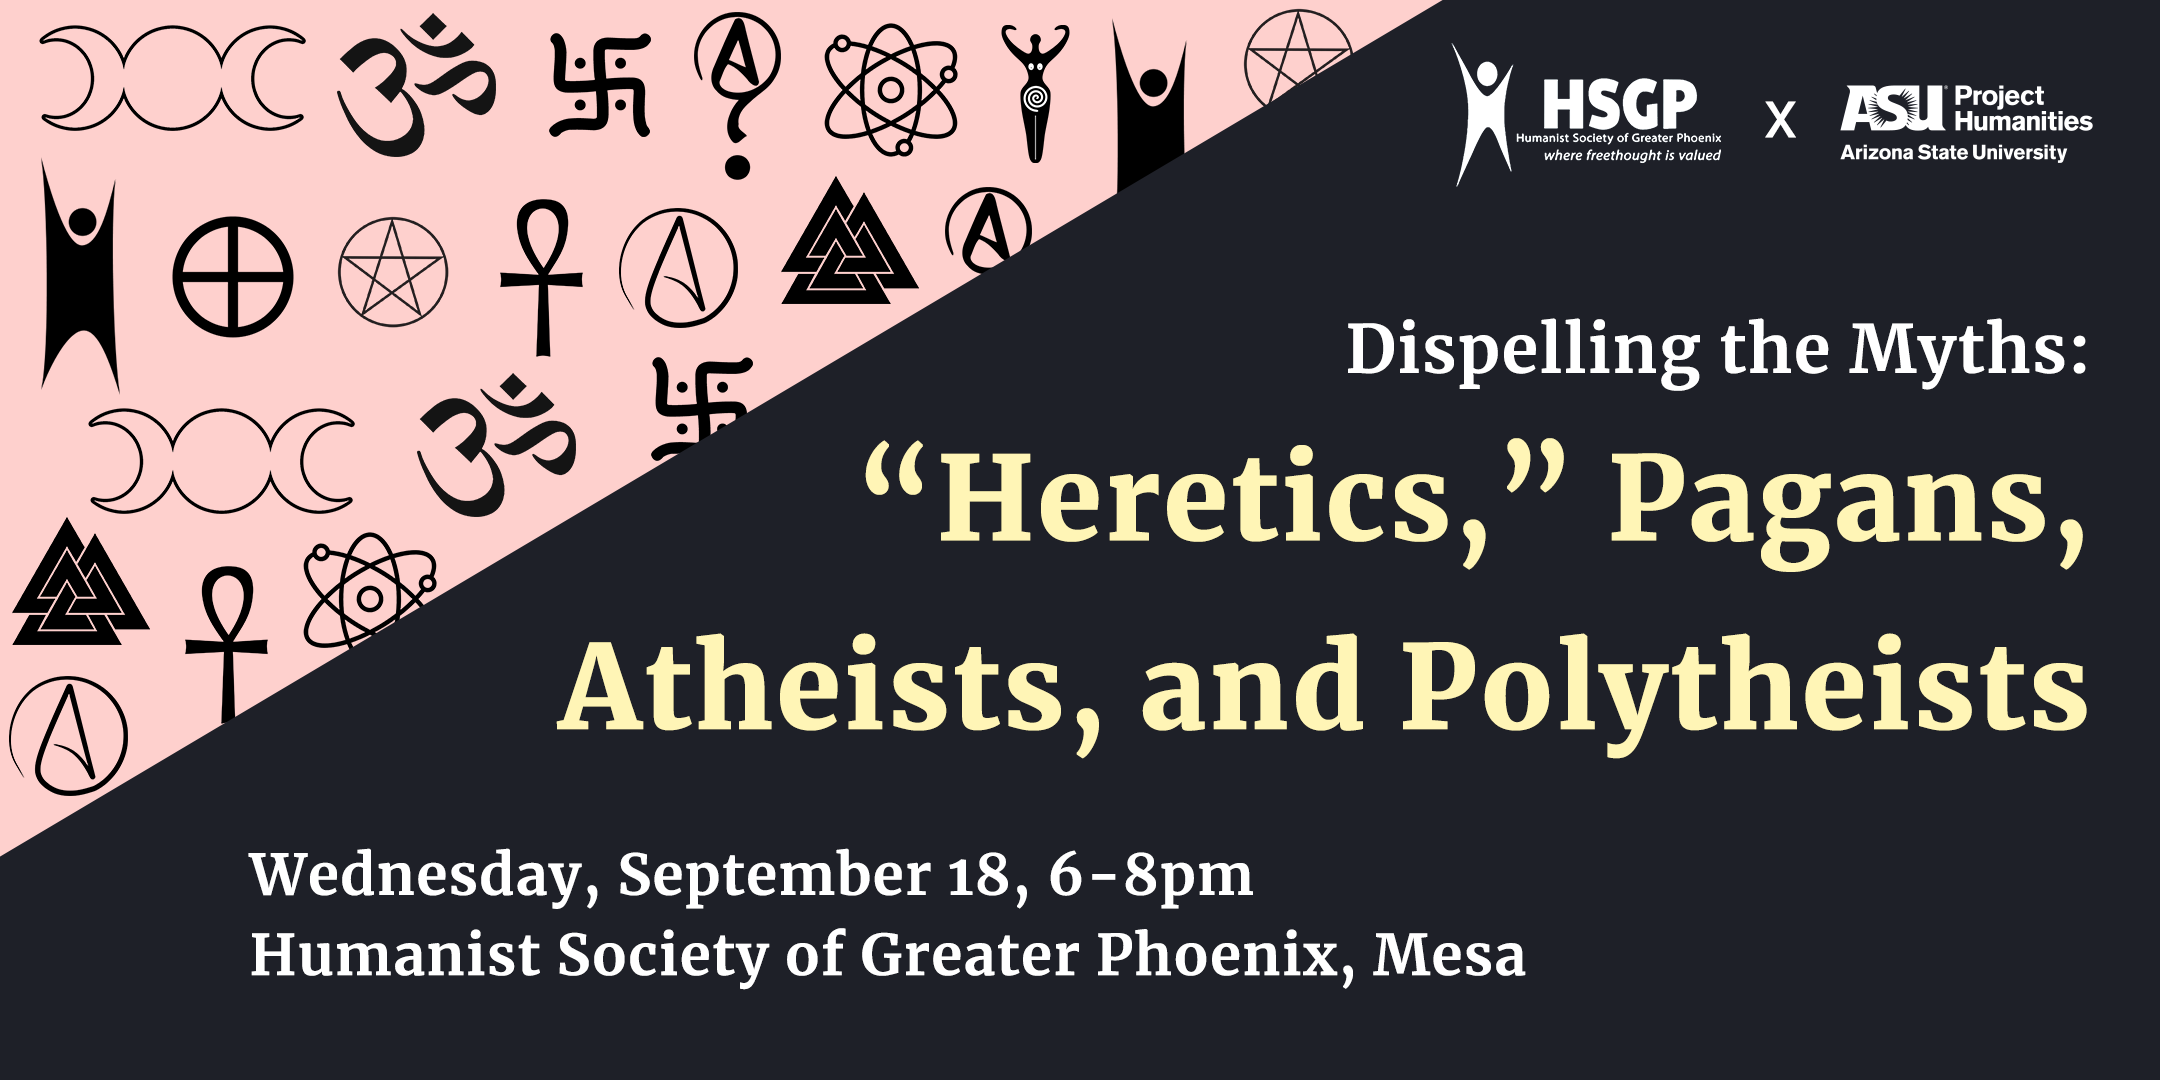 Dispelling the Myths: "Heretics," Pagans, Atheists, and Polytheists Event